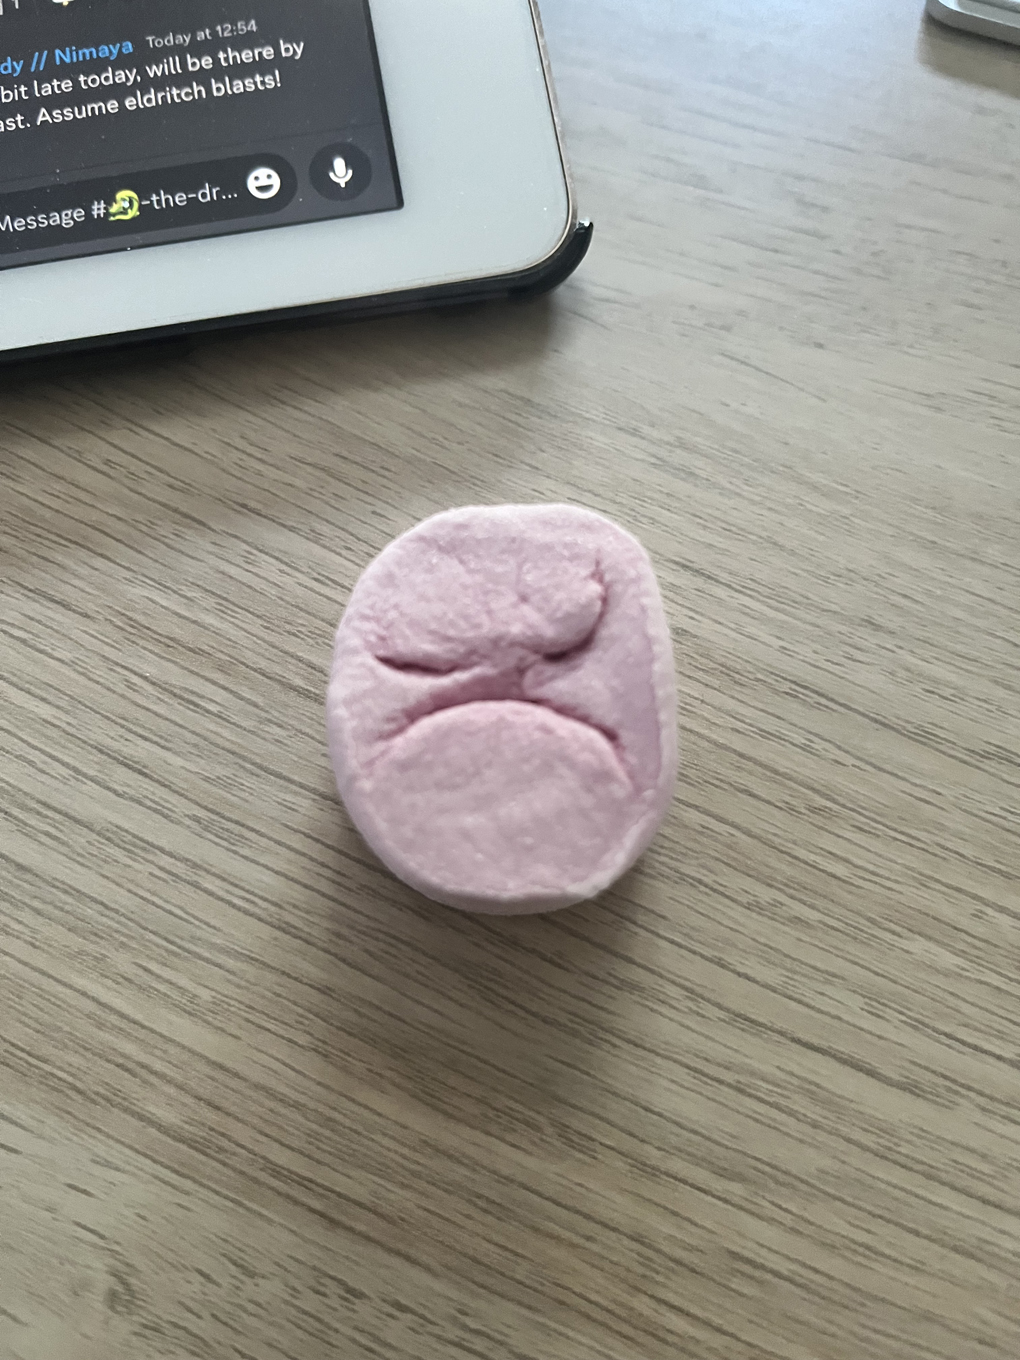 A pink marshmallow sat on a wooden office desk. The marshmallow has a grumpy face.